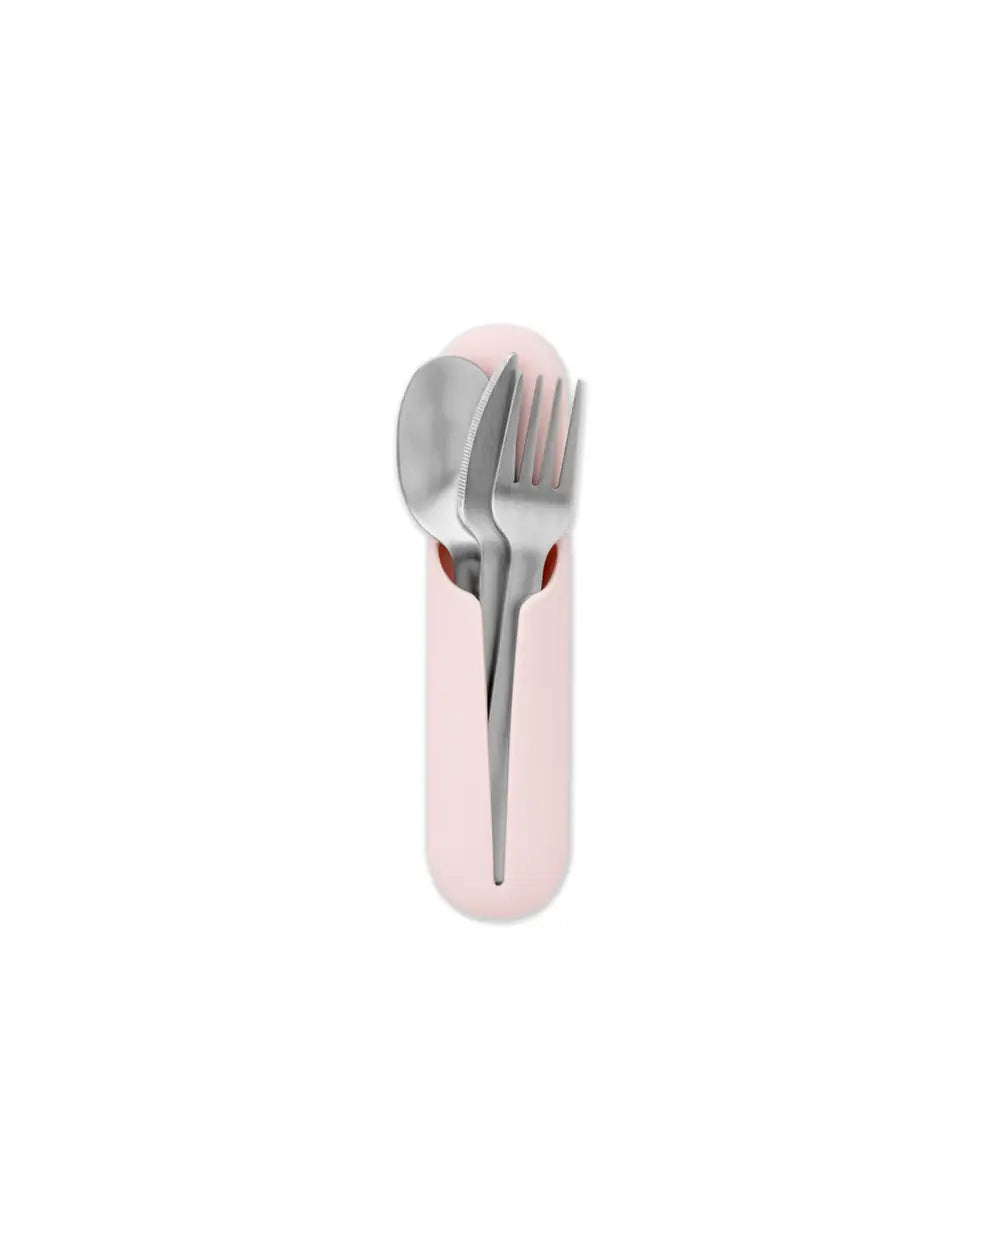 Travel Utensil Set with Silicone Case